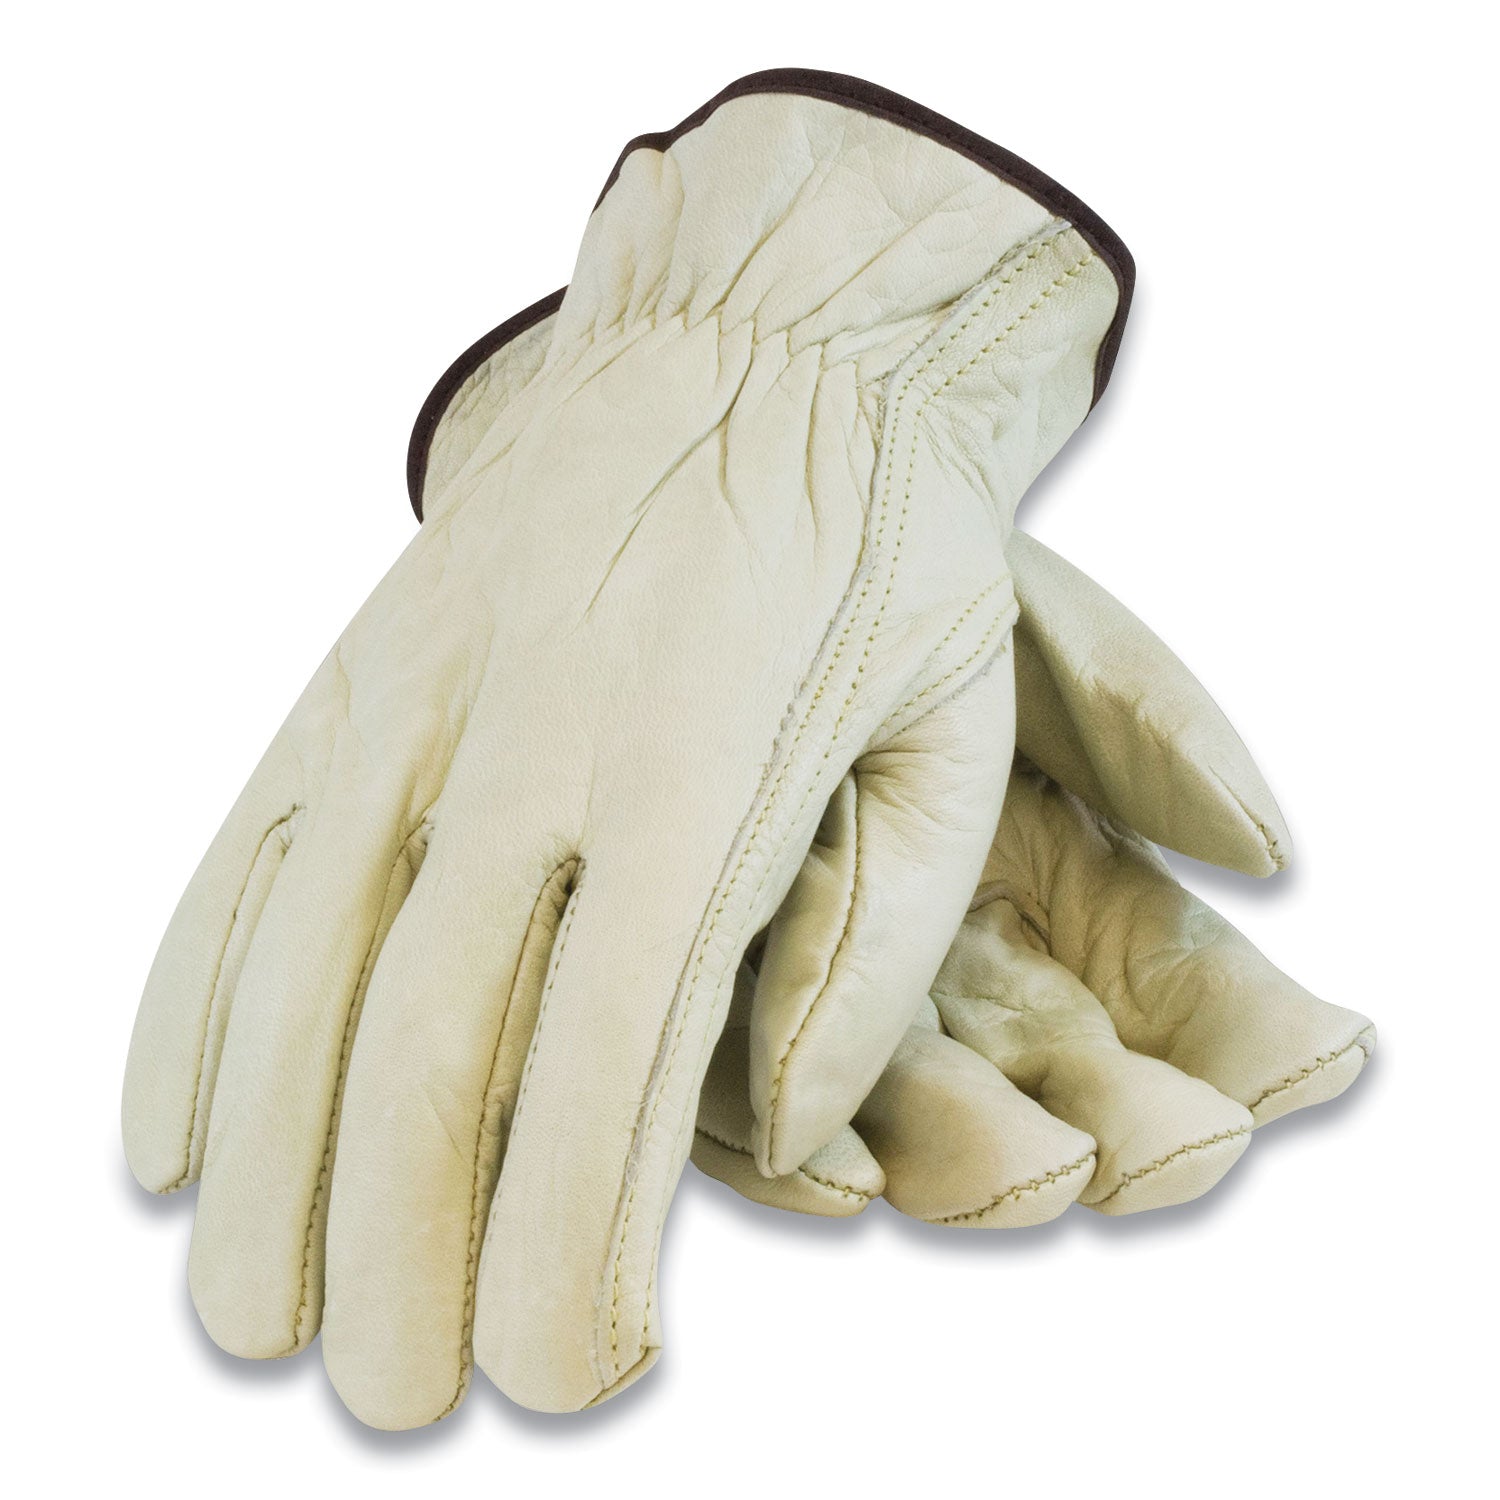 economy-grade-top-grain-cowhide-leather-drivers-gloves-small-tan_pid68162s - 1